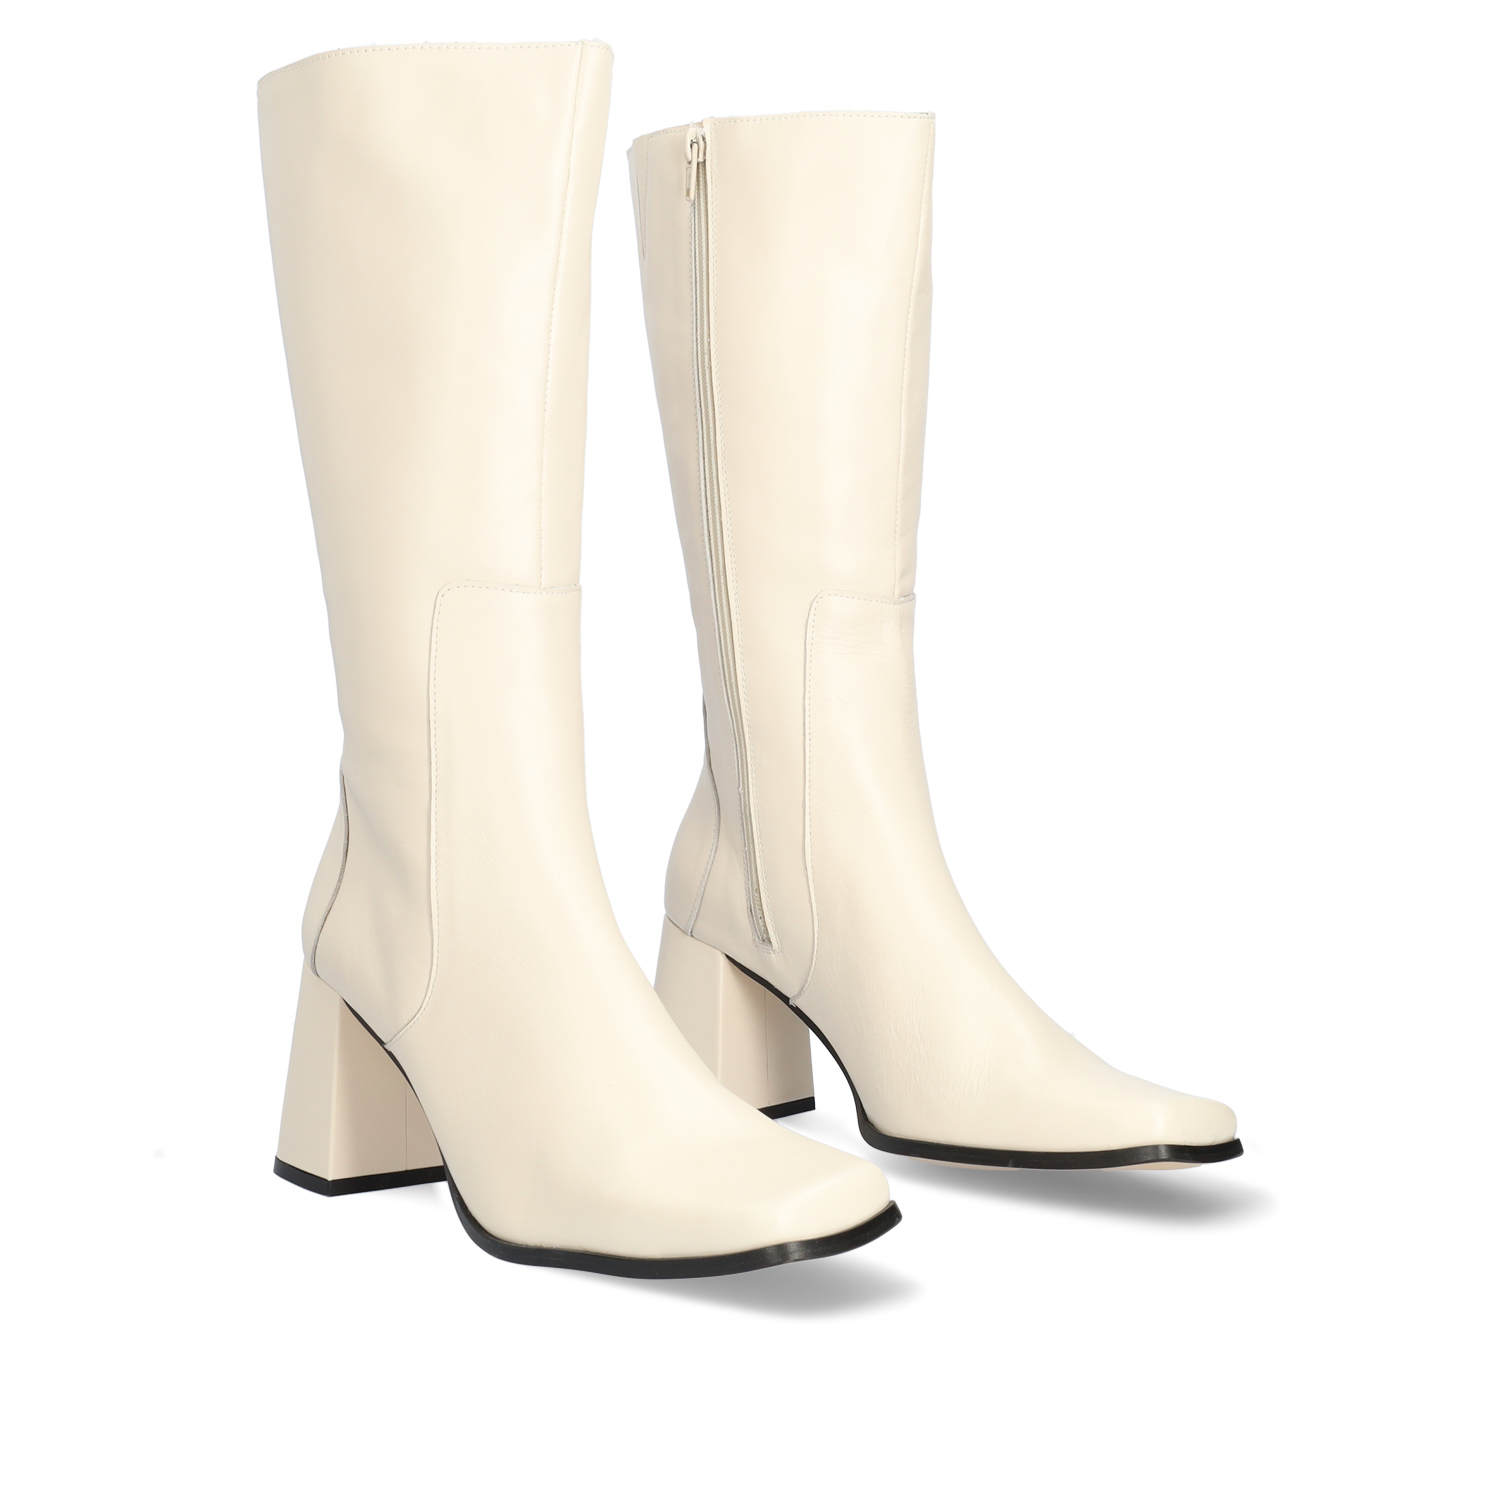 Heeled boots in off-white leather 